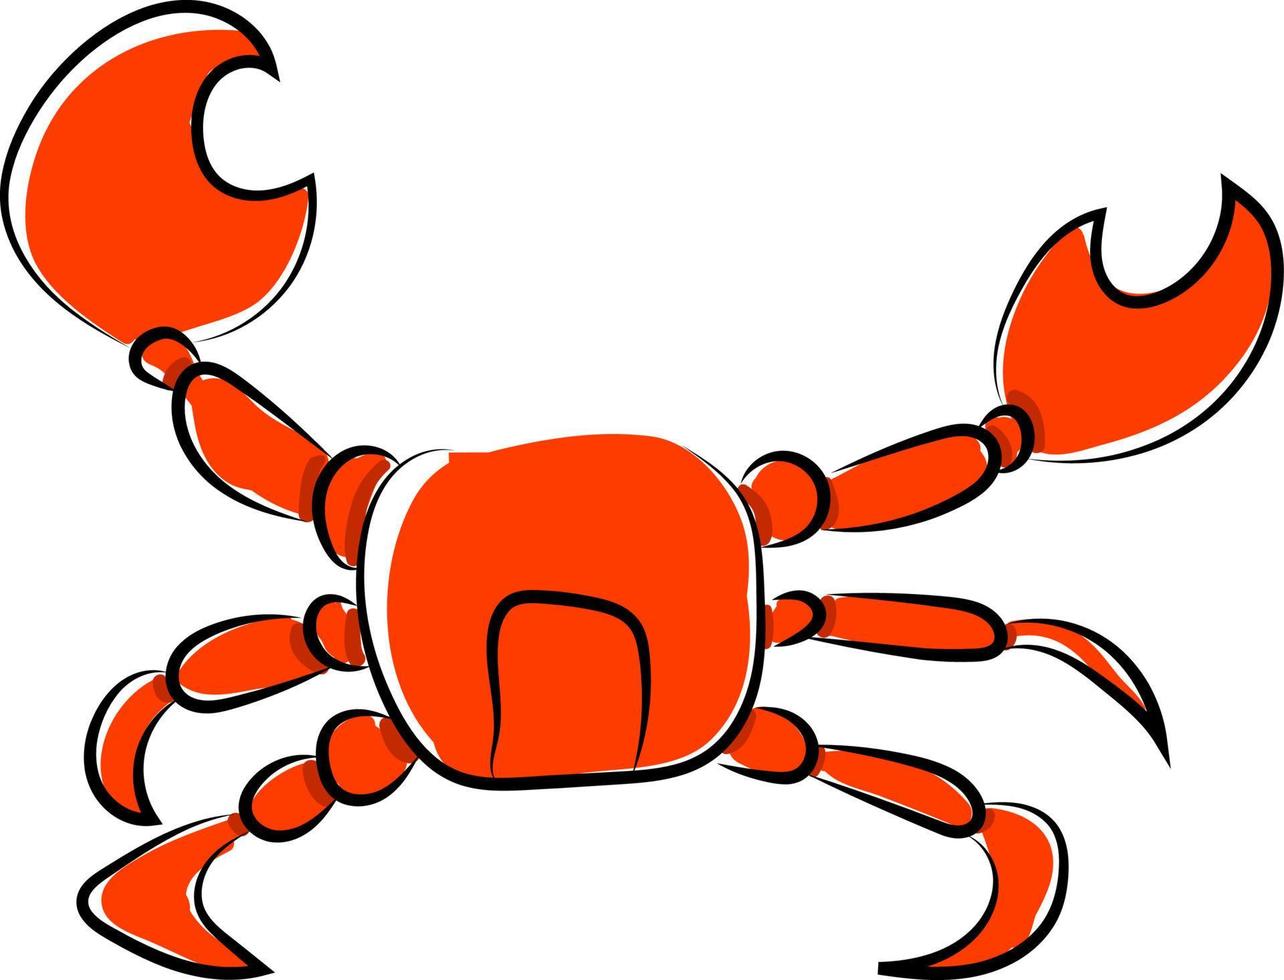 Crab drawing, illustration, vector on white background.